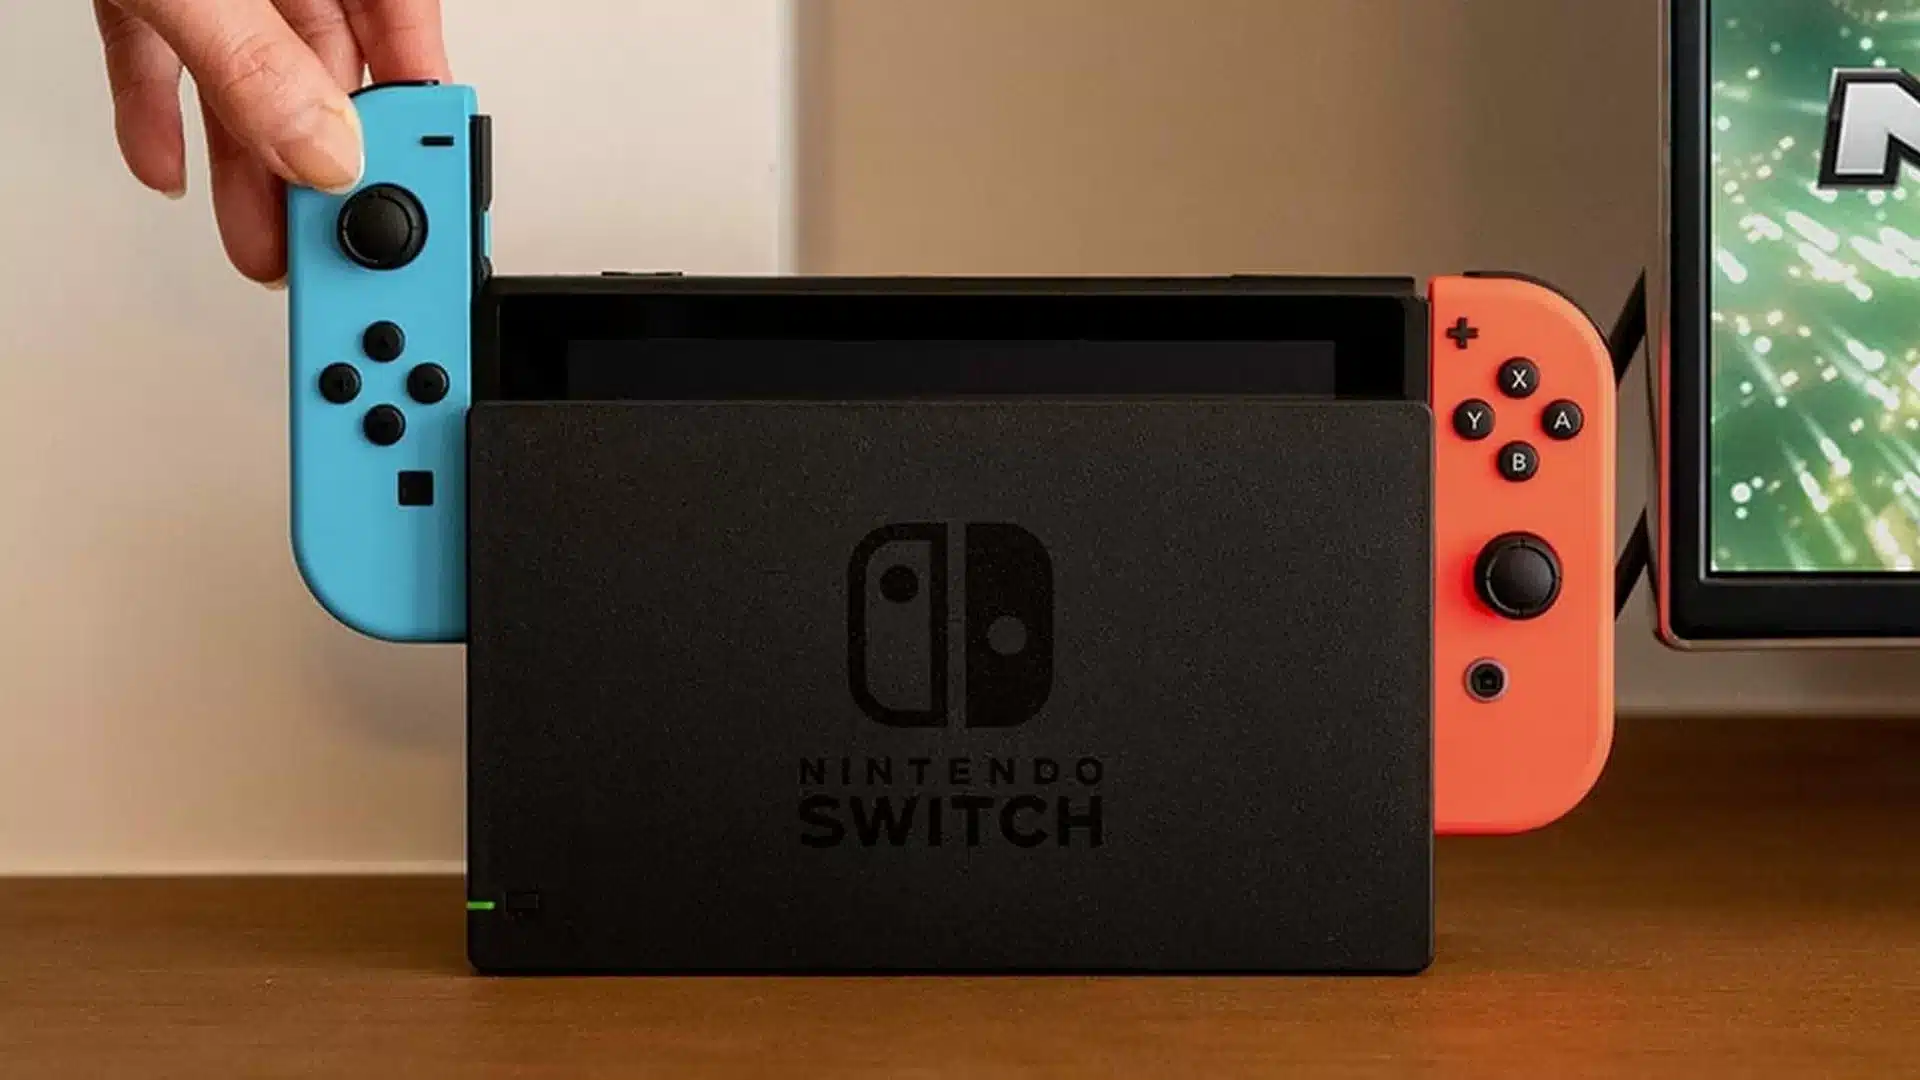 Nintendo Accounts to 'Help Ease Transition' to the Switch Successor